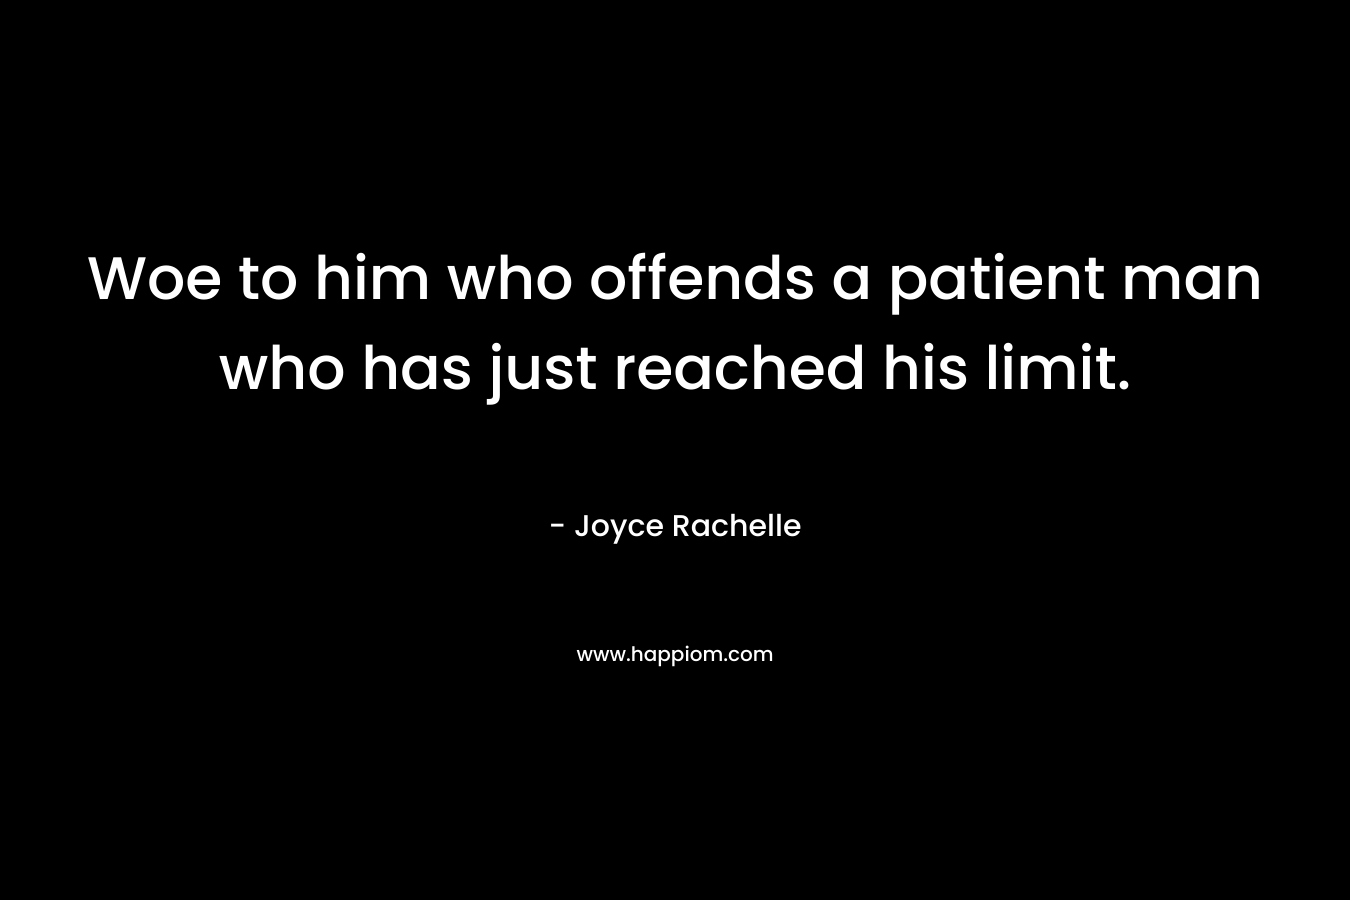 Woe to him who offends a patient man who has just reached his limit. – Joyce Rachelle